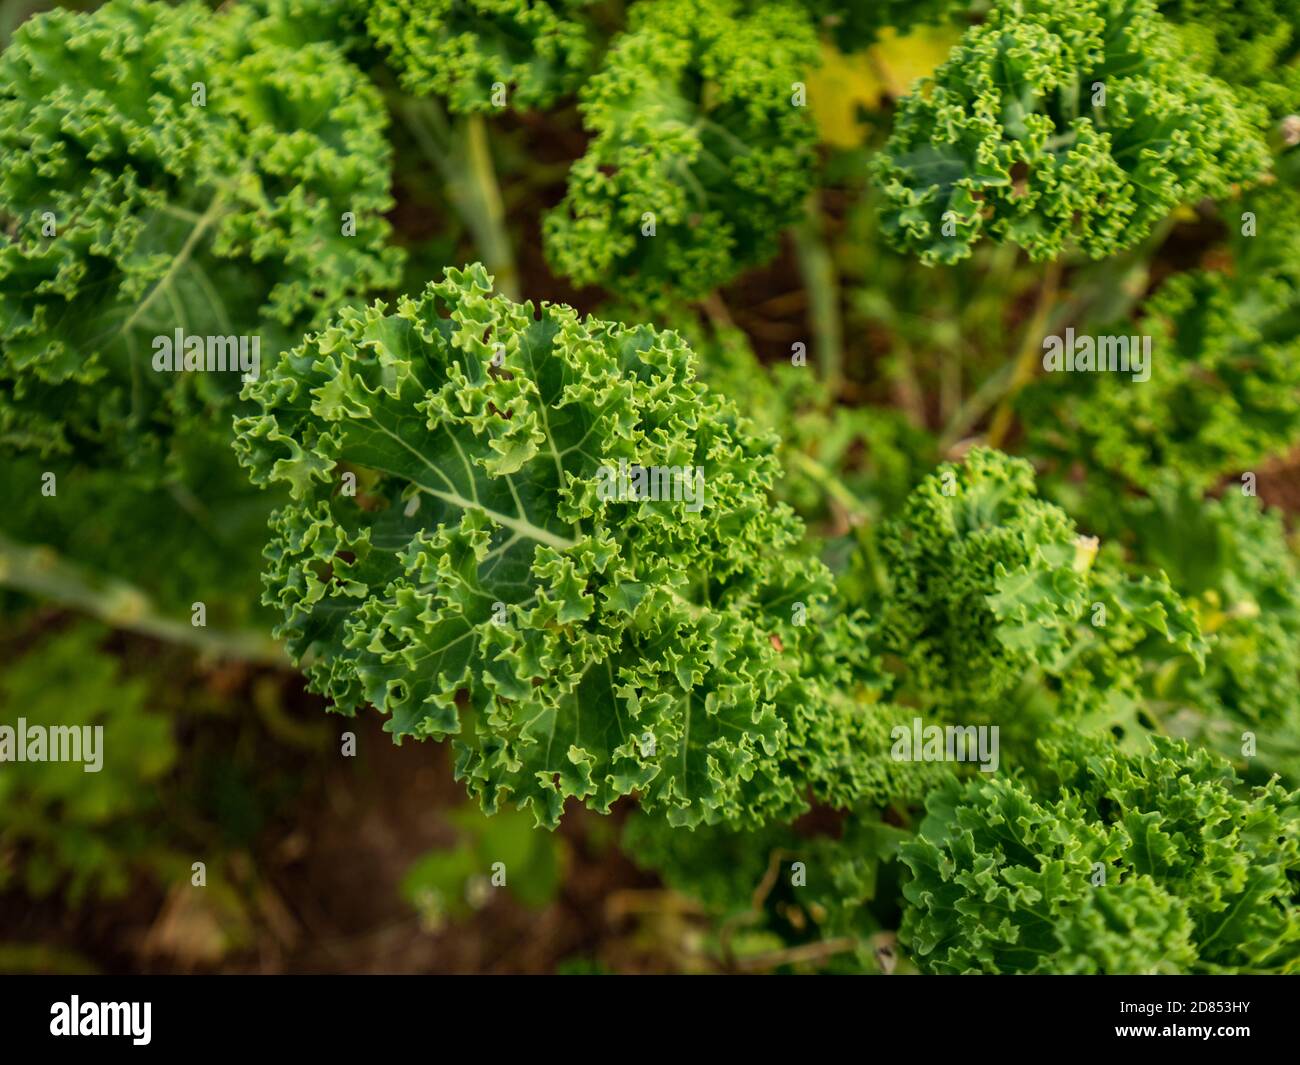 Curly kale grown in the natural garden. Selective focus. Stock Photo